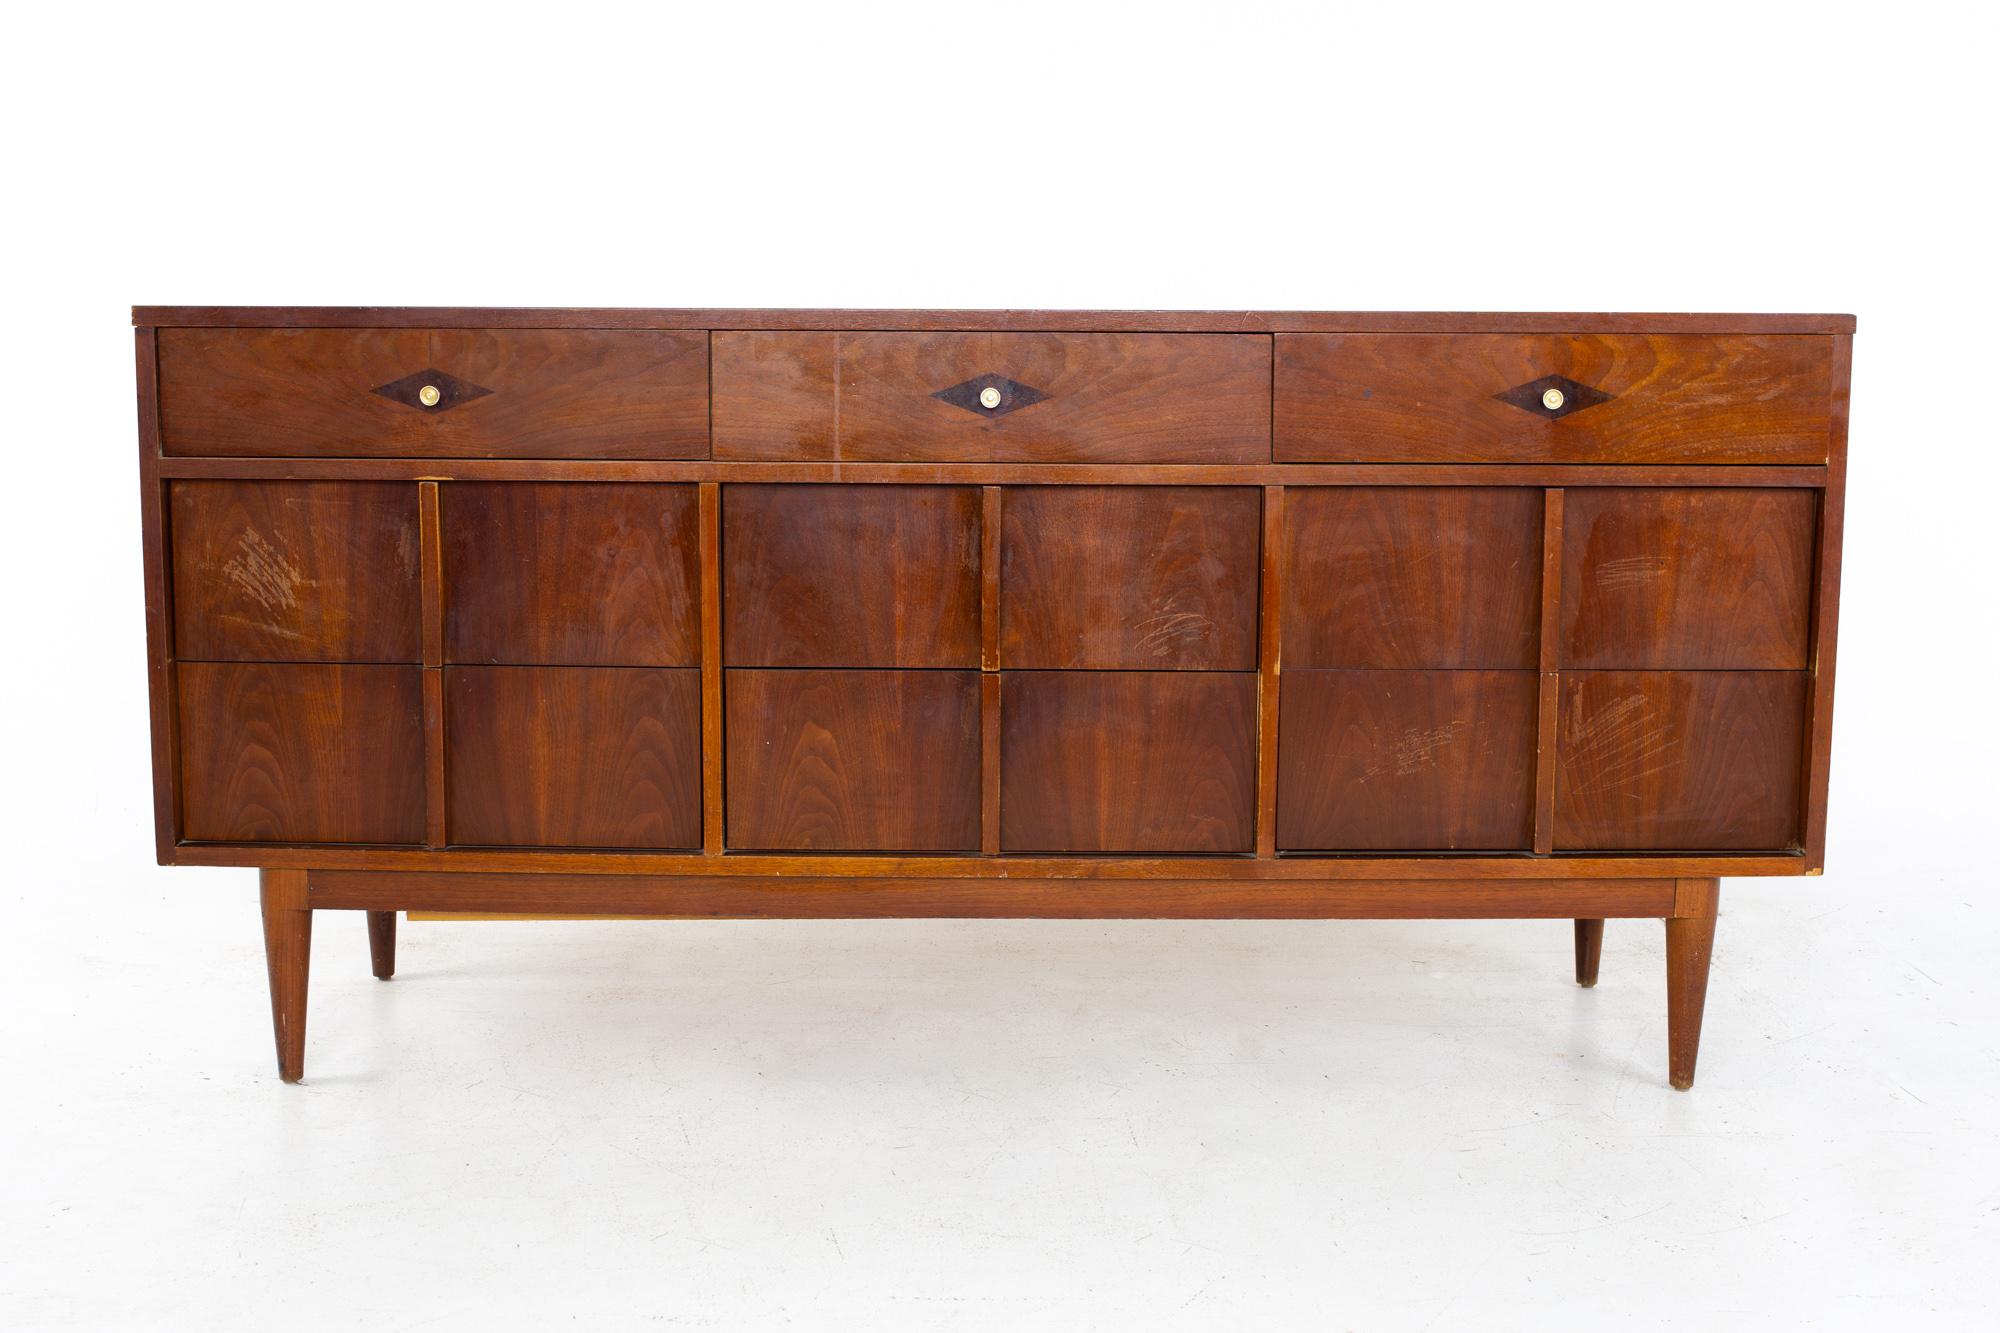 Basic Witz mid century walnut 9 drawer lowboy dresser
Lowboy measures: 66 wide x 18 deep x 31 inches high

All pieces of furniture can be had in what we call restored vintage condition. That means the piece is restored upon purchase so it’s free